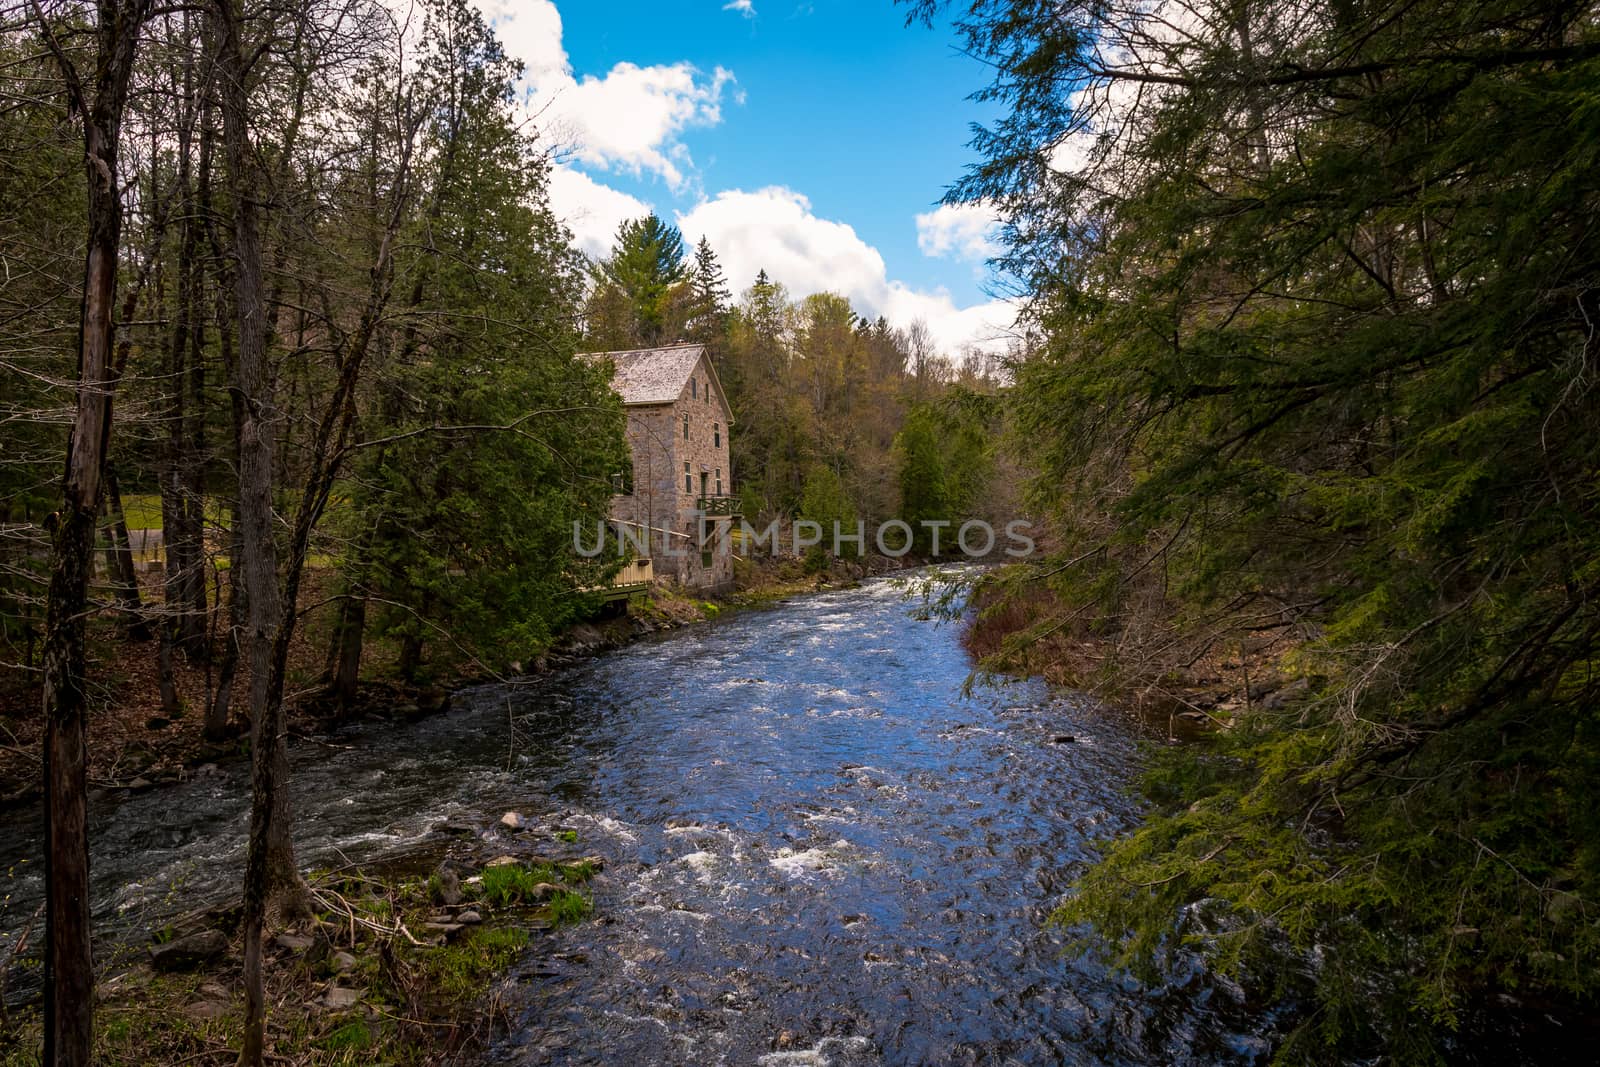 A river rushes past an old stone building in the spring, with whitewater rapids between evergreen and deciduous trees as it runs through the woods.